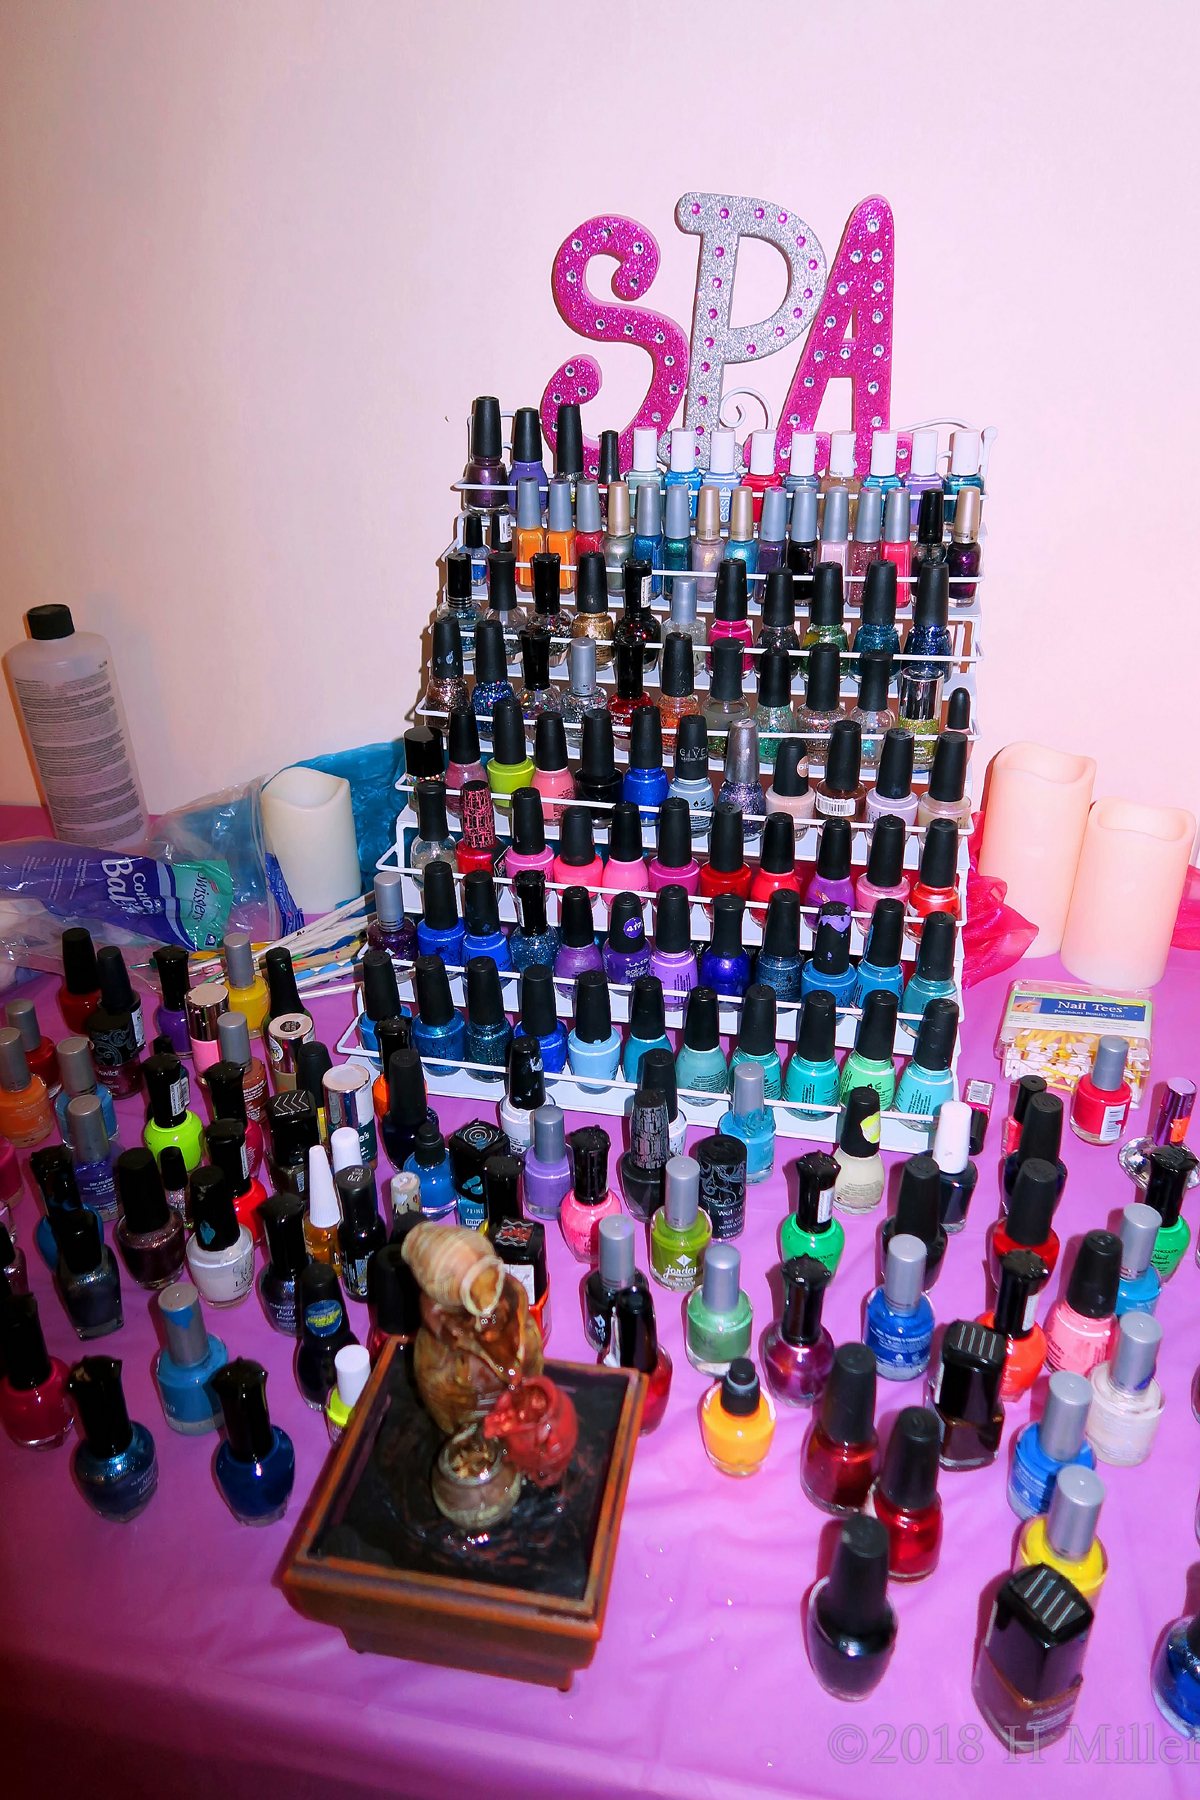 Mountain Of Nail Polish! Wide Selection At The Kids Nail Spa For Spa Party Guests 